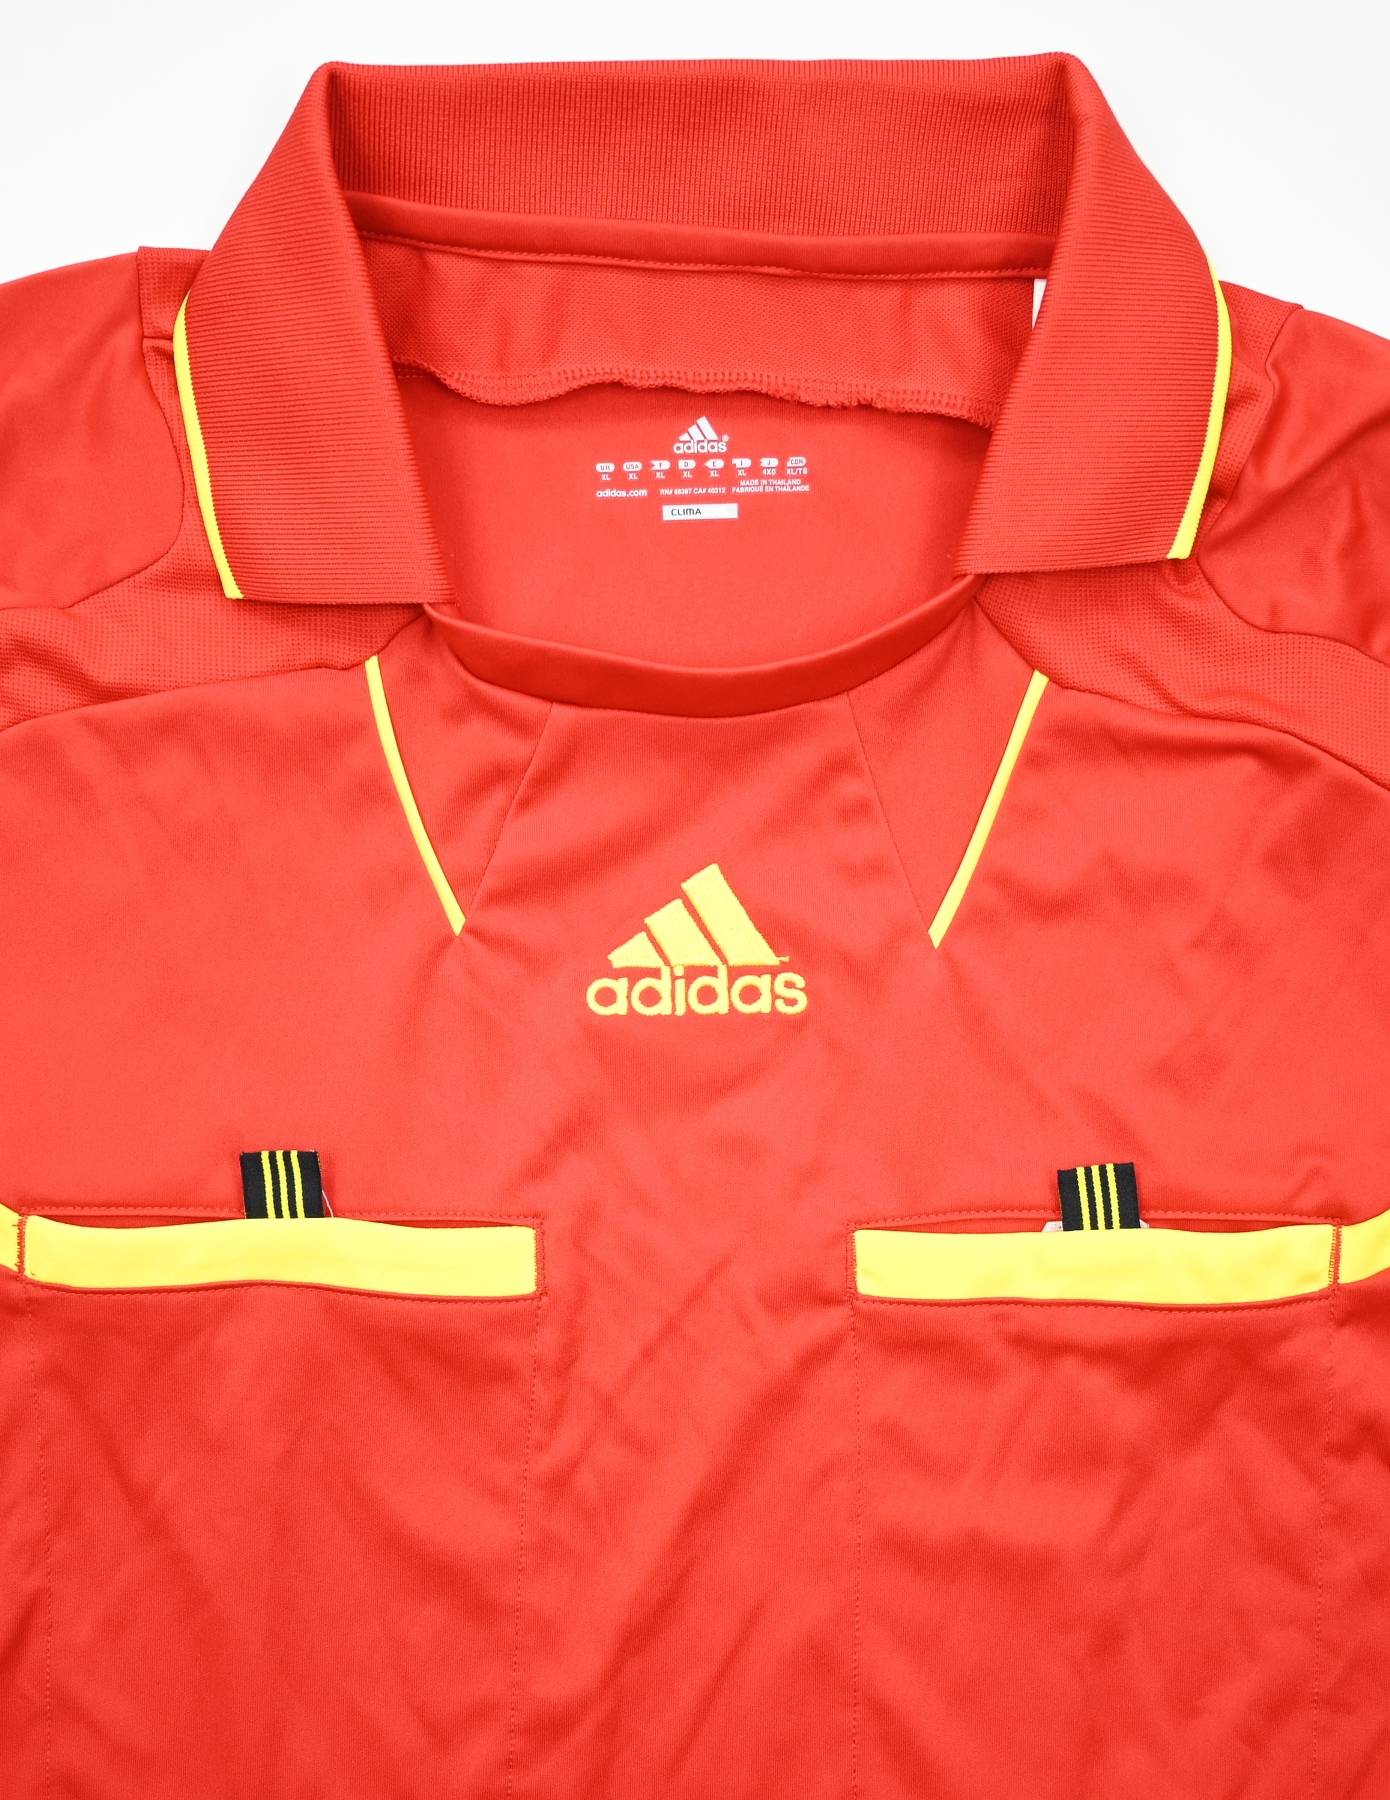 ADIDAS REFEREE SHIRT LONGSLEEVE XL Other Shirts \ Other Sports New in ...